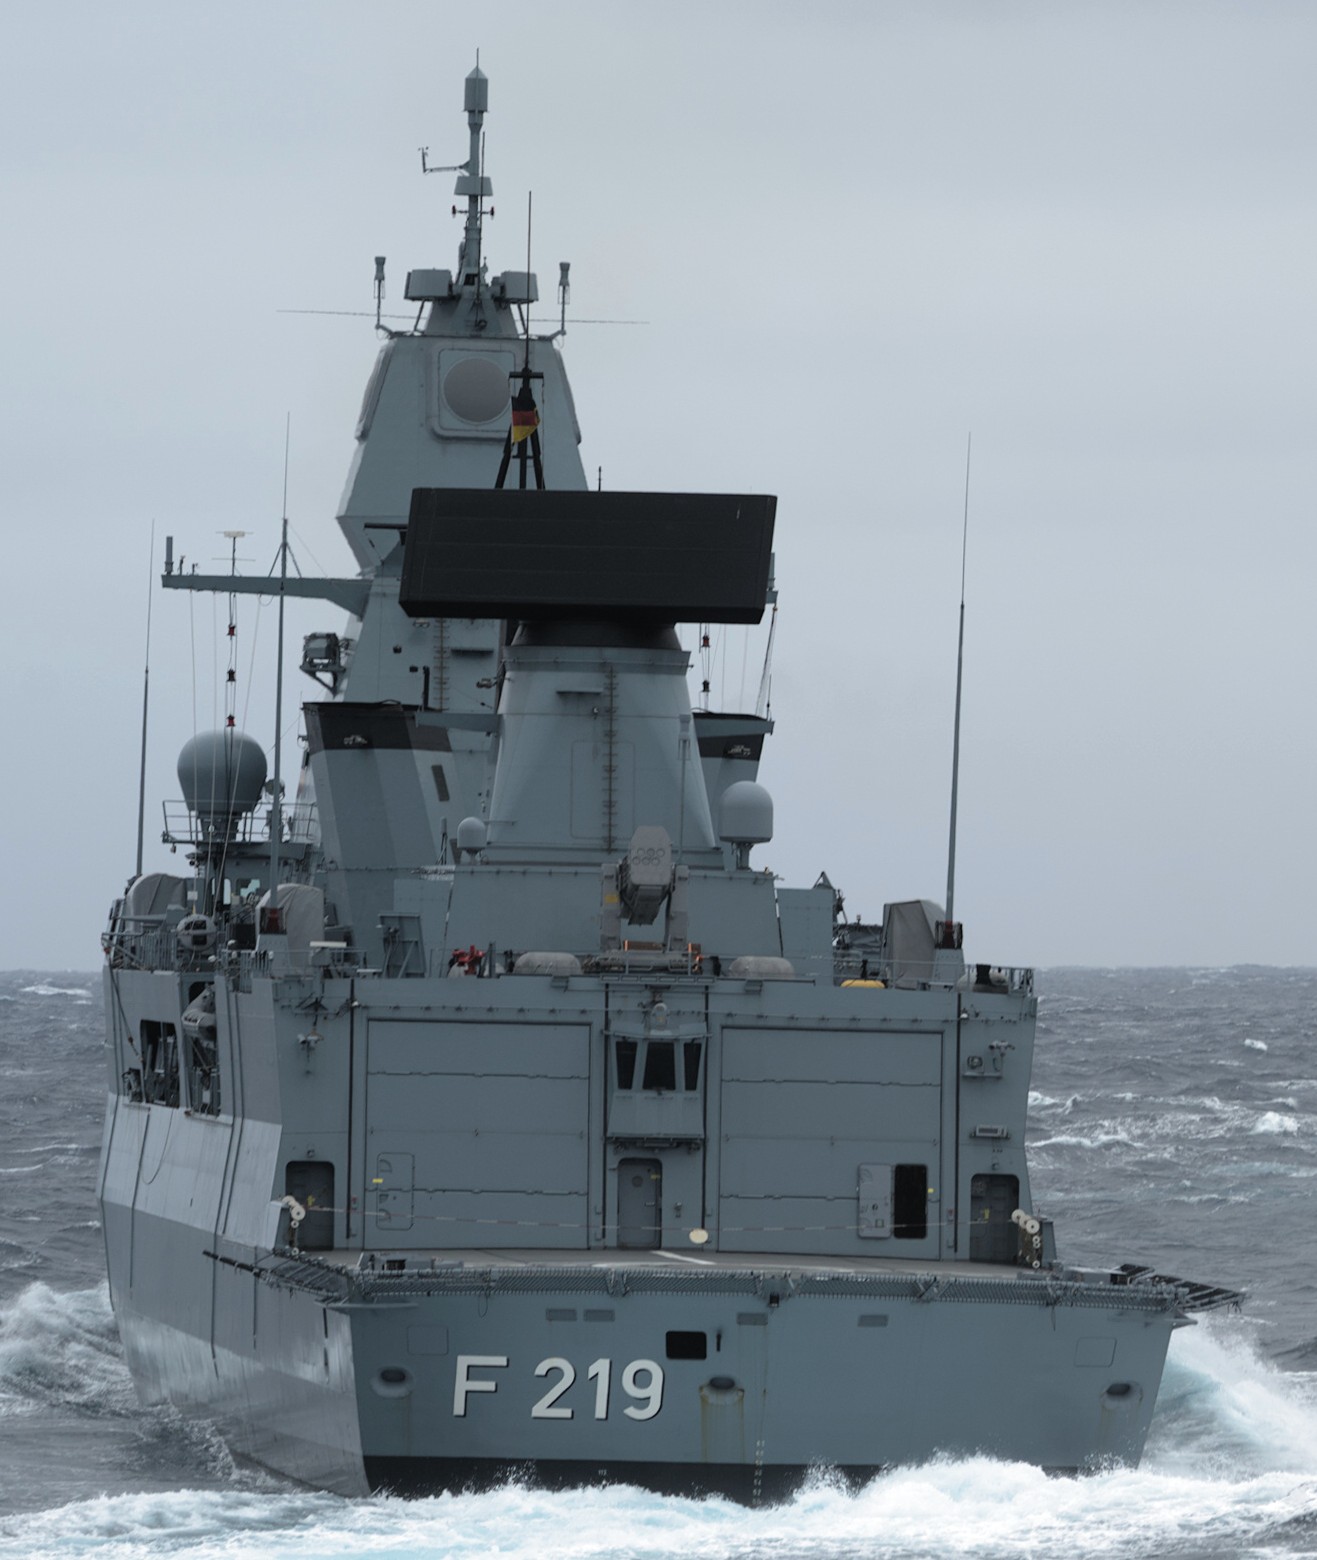 f-219 fgs sachsen type 124 class guided missile frigate ffg german navy marine fregatte 41